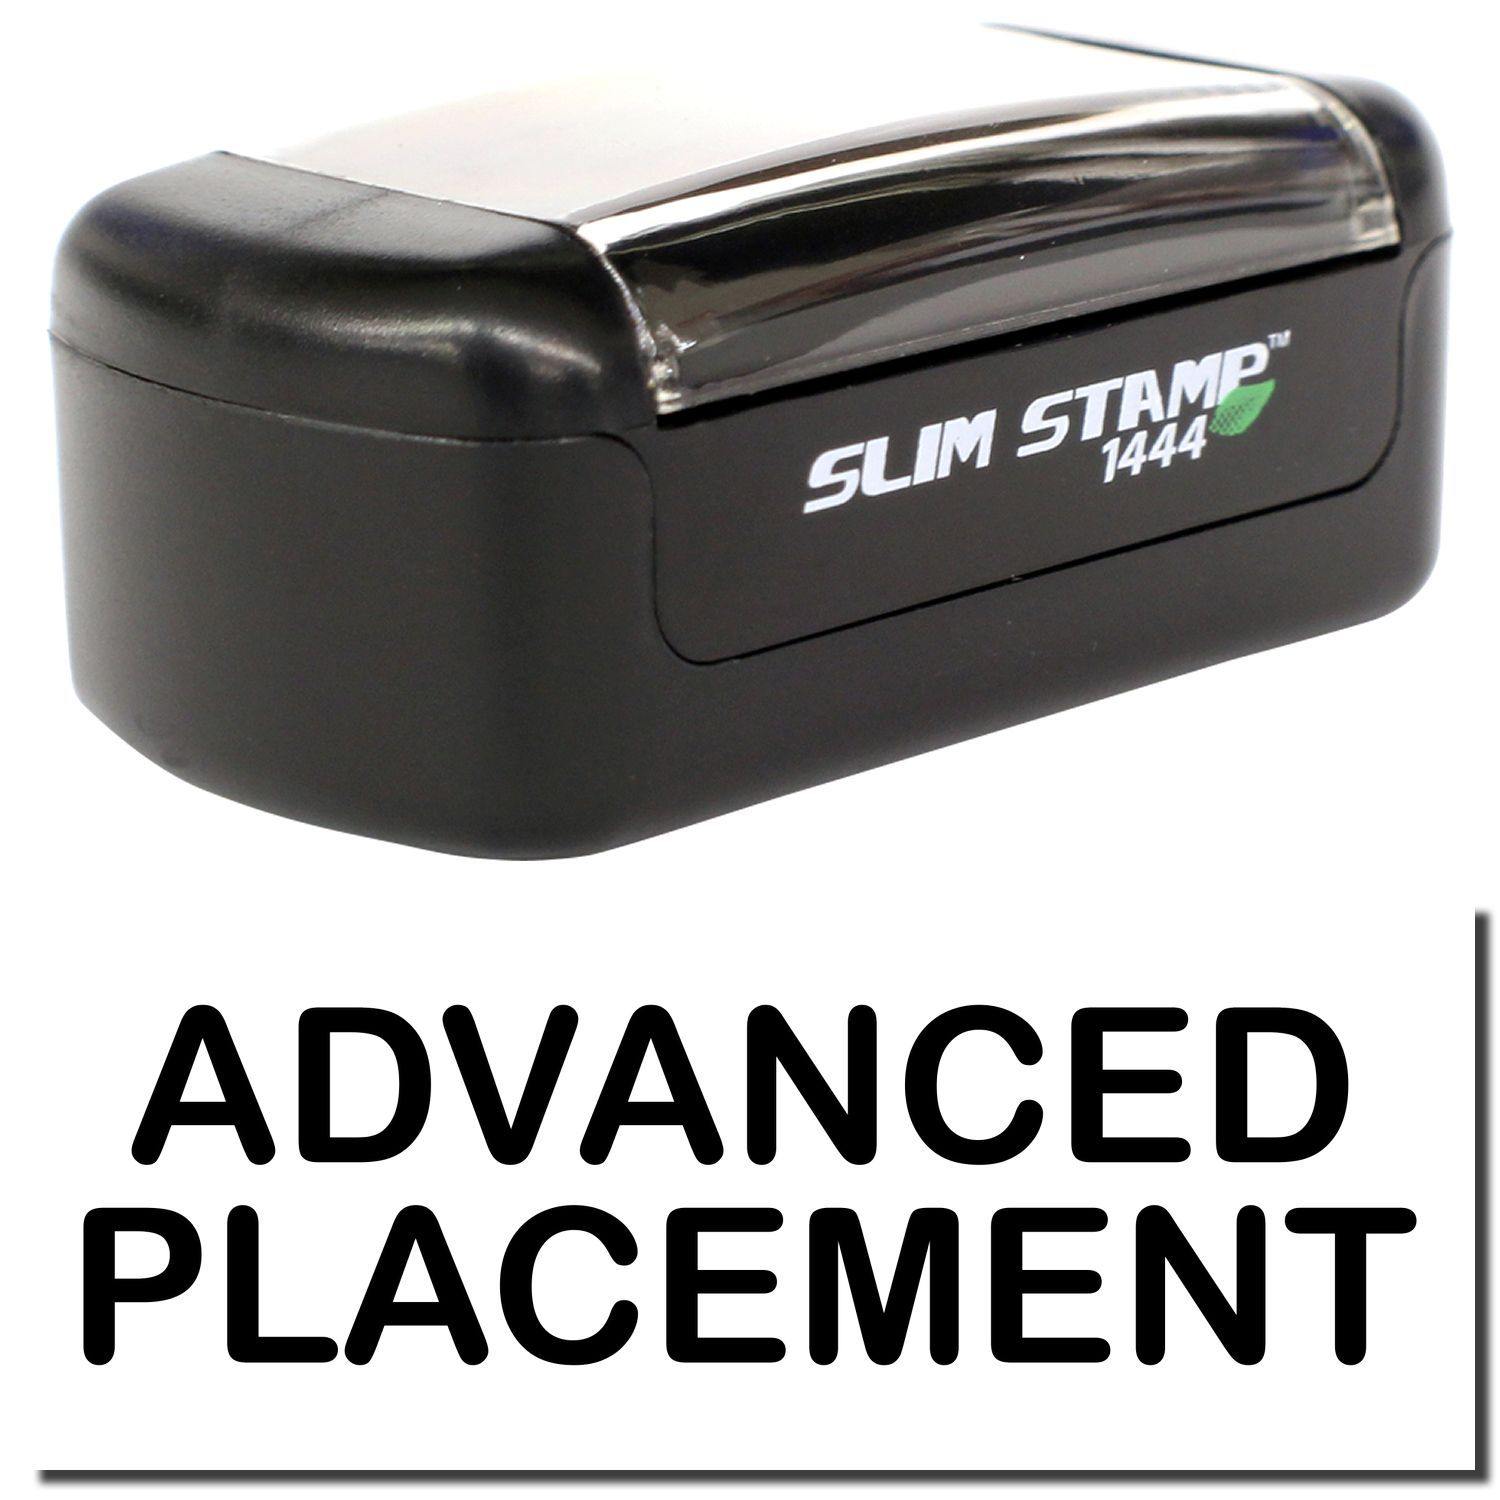 A stock office pre-inked stamp with a stamped image showing how the text "ADVANCED PLACEMENT" is displayed after stamping.